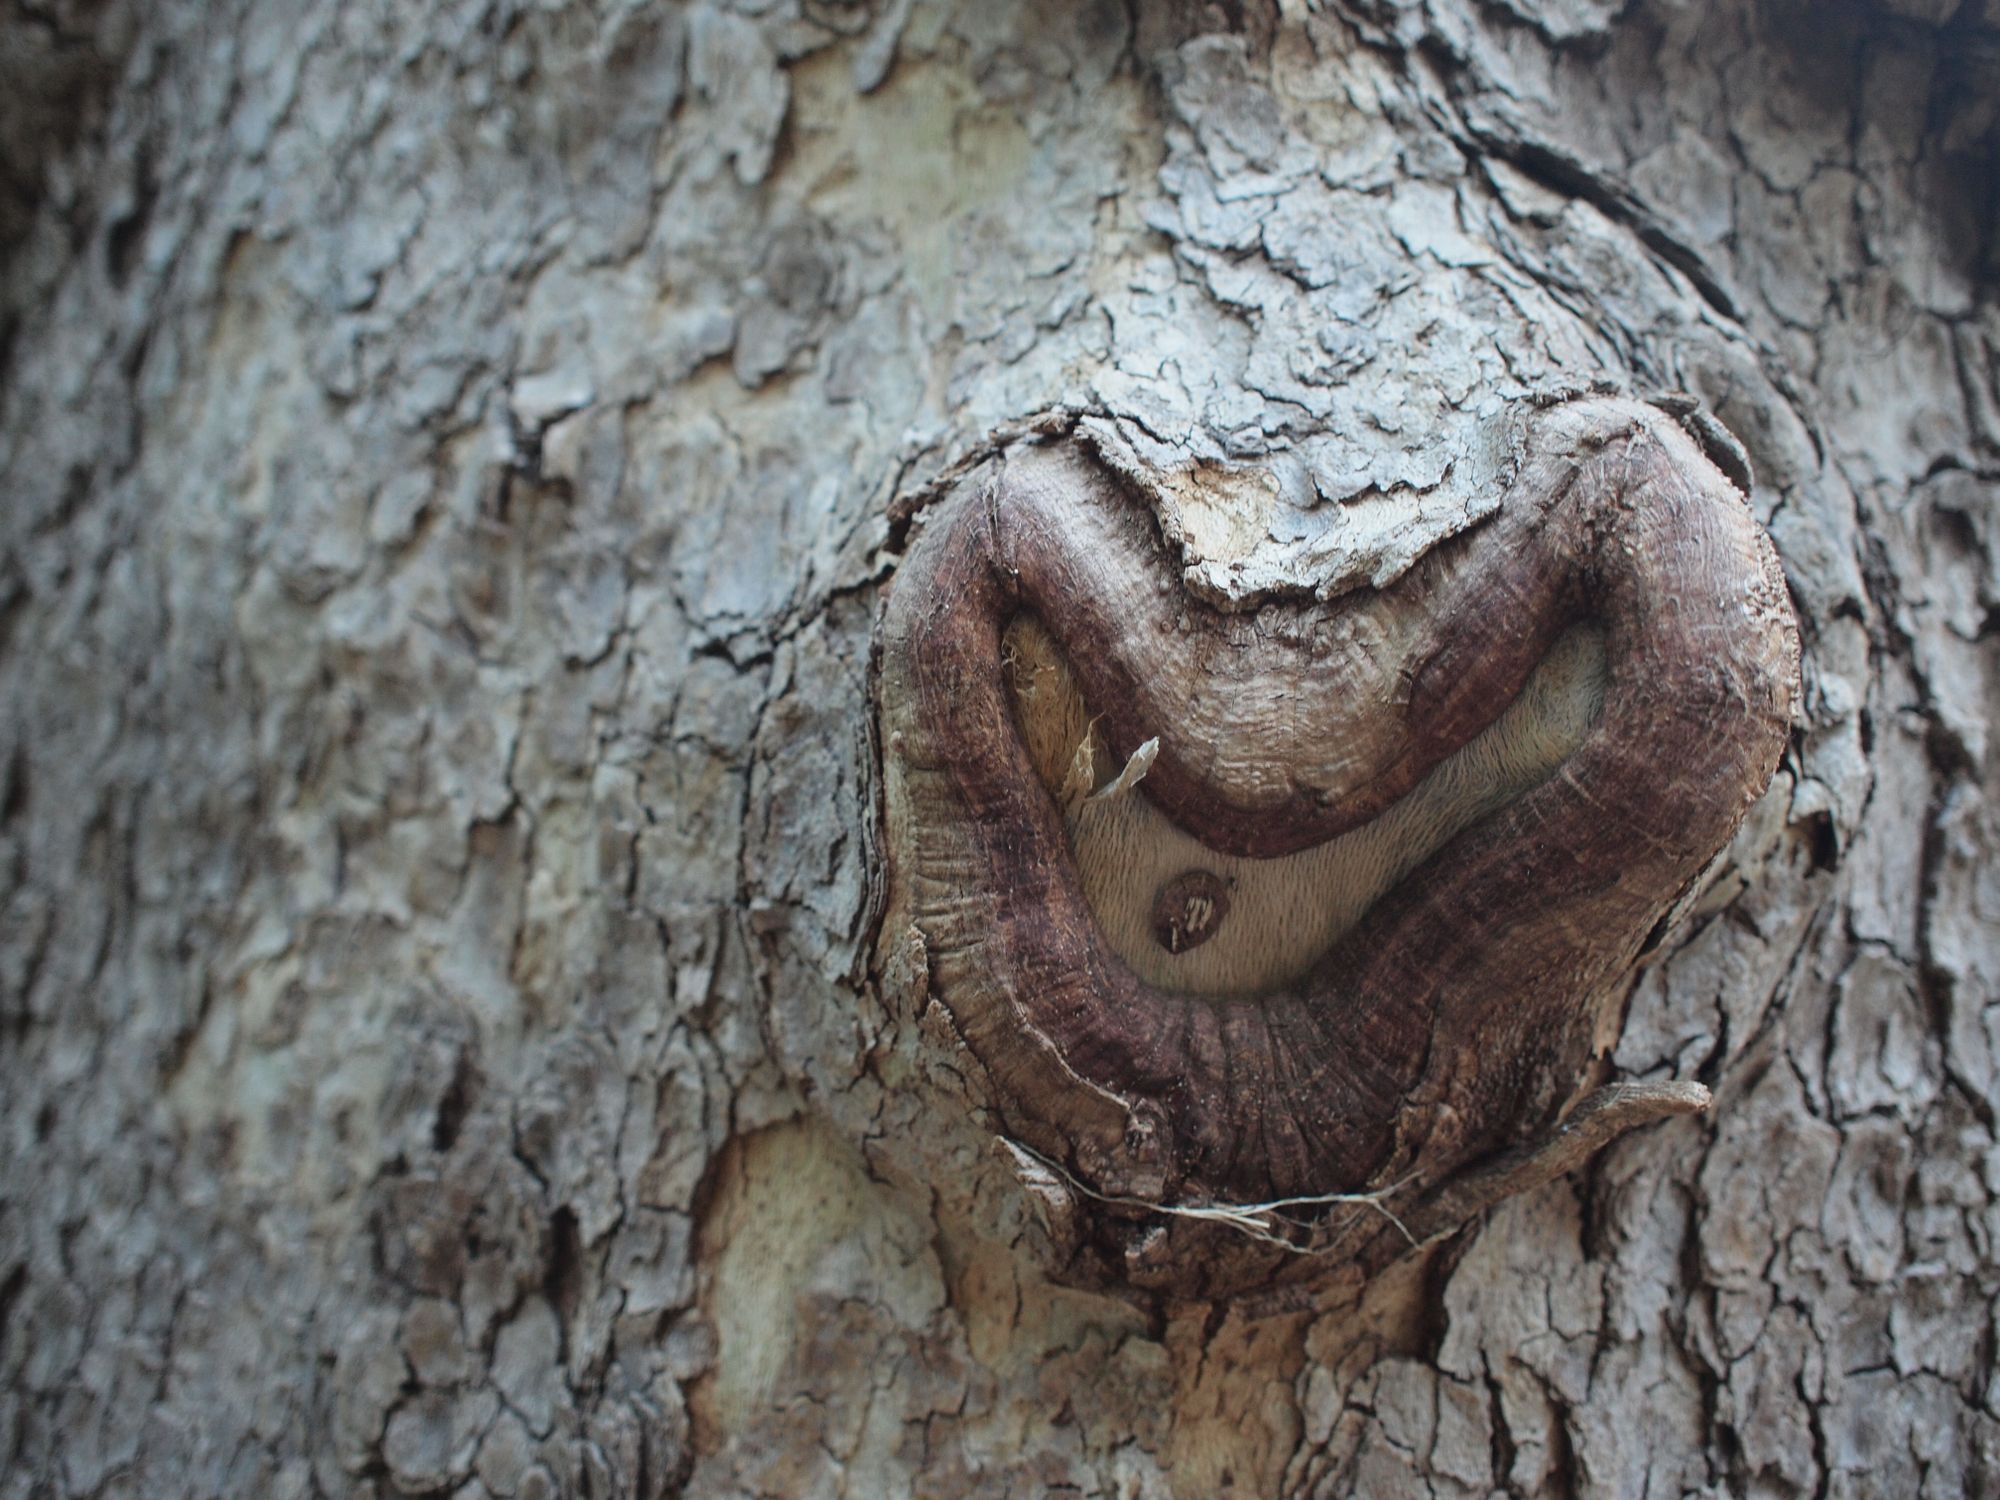 The bark of a sycamore tree grown into a smile shaped knot.